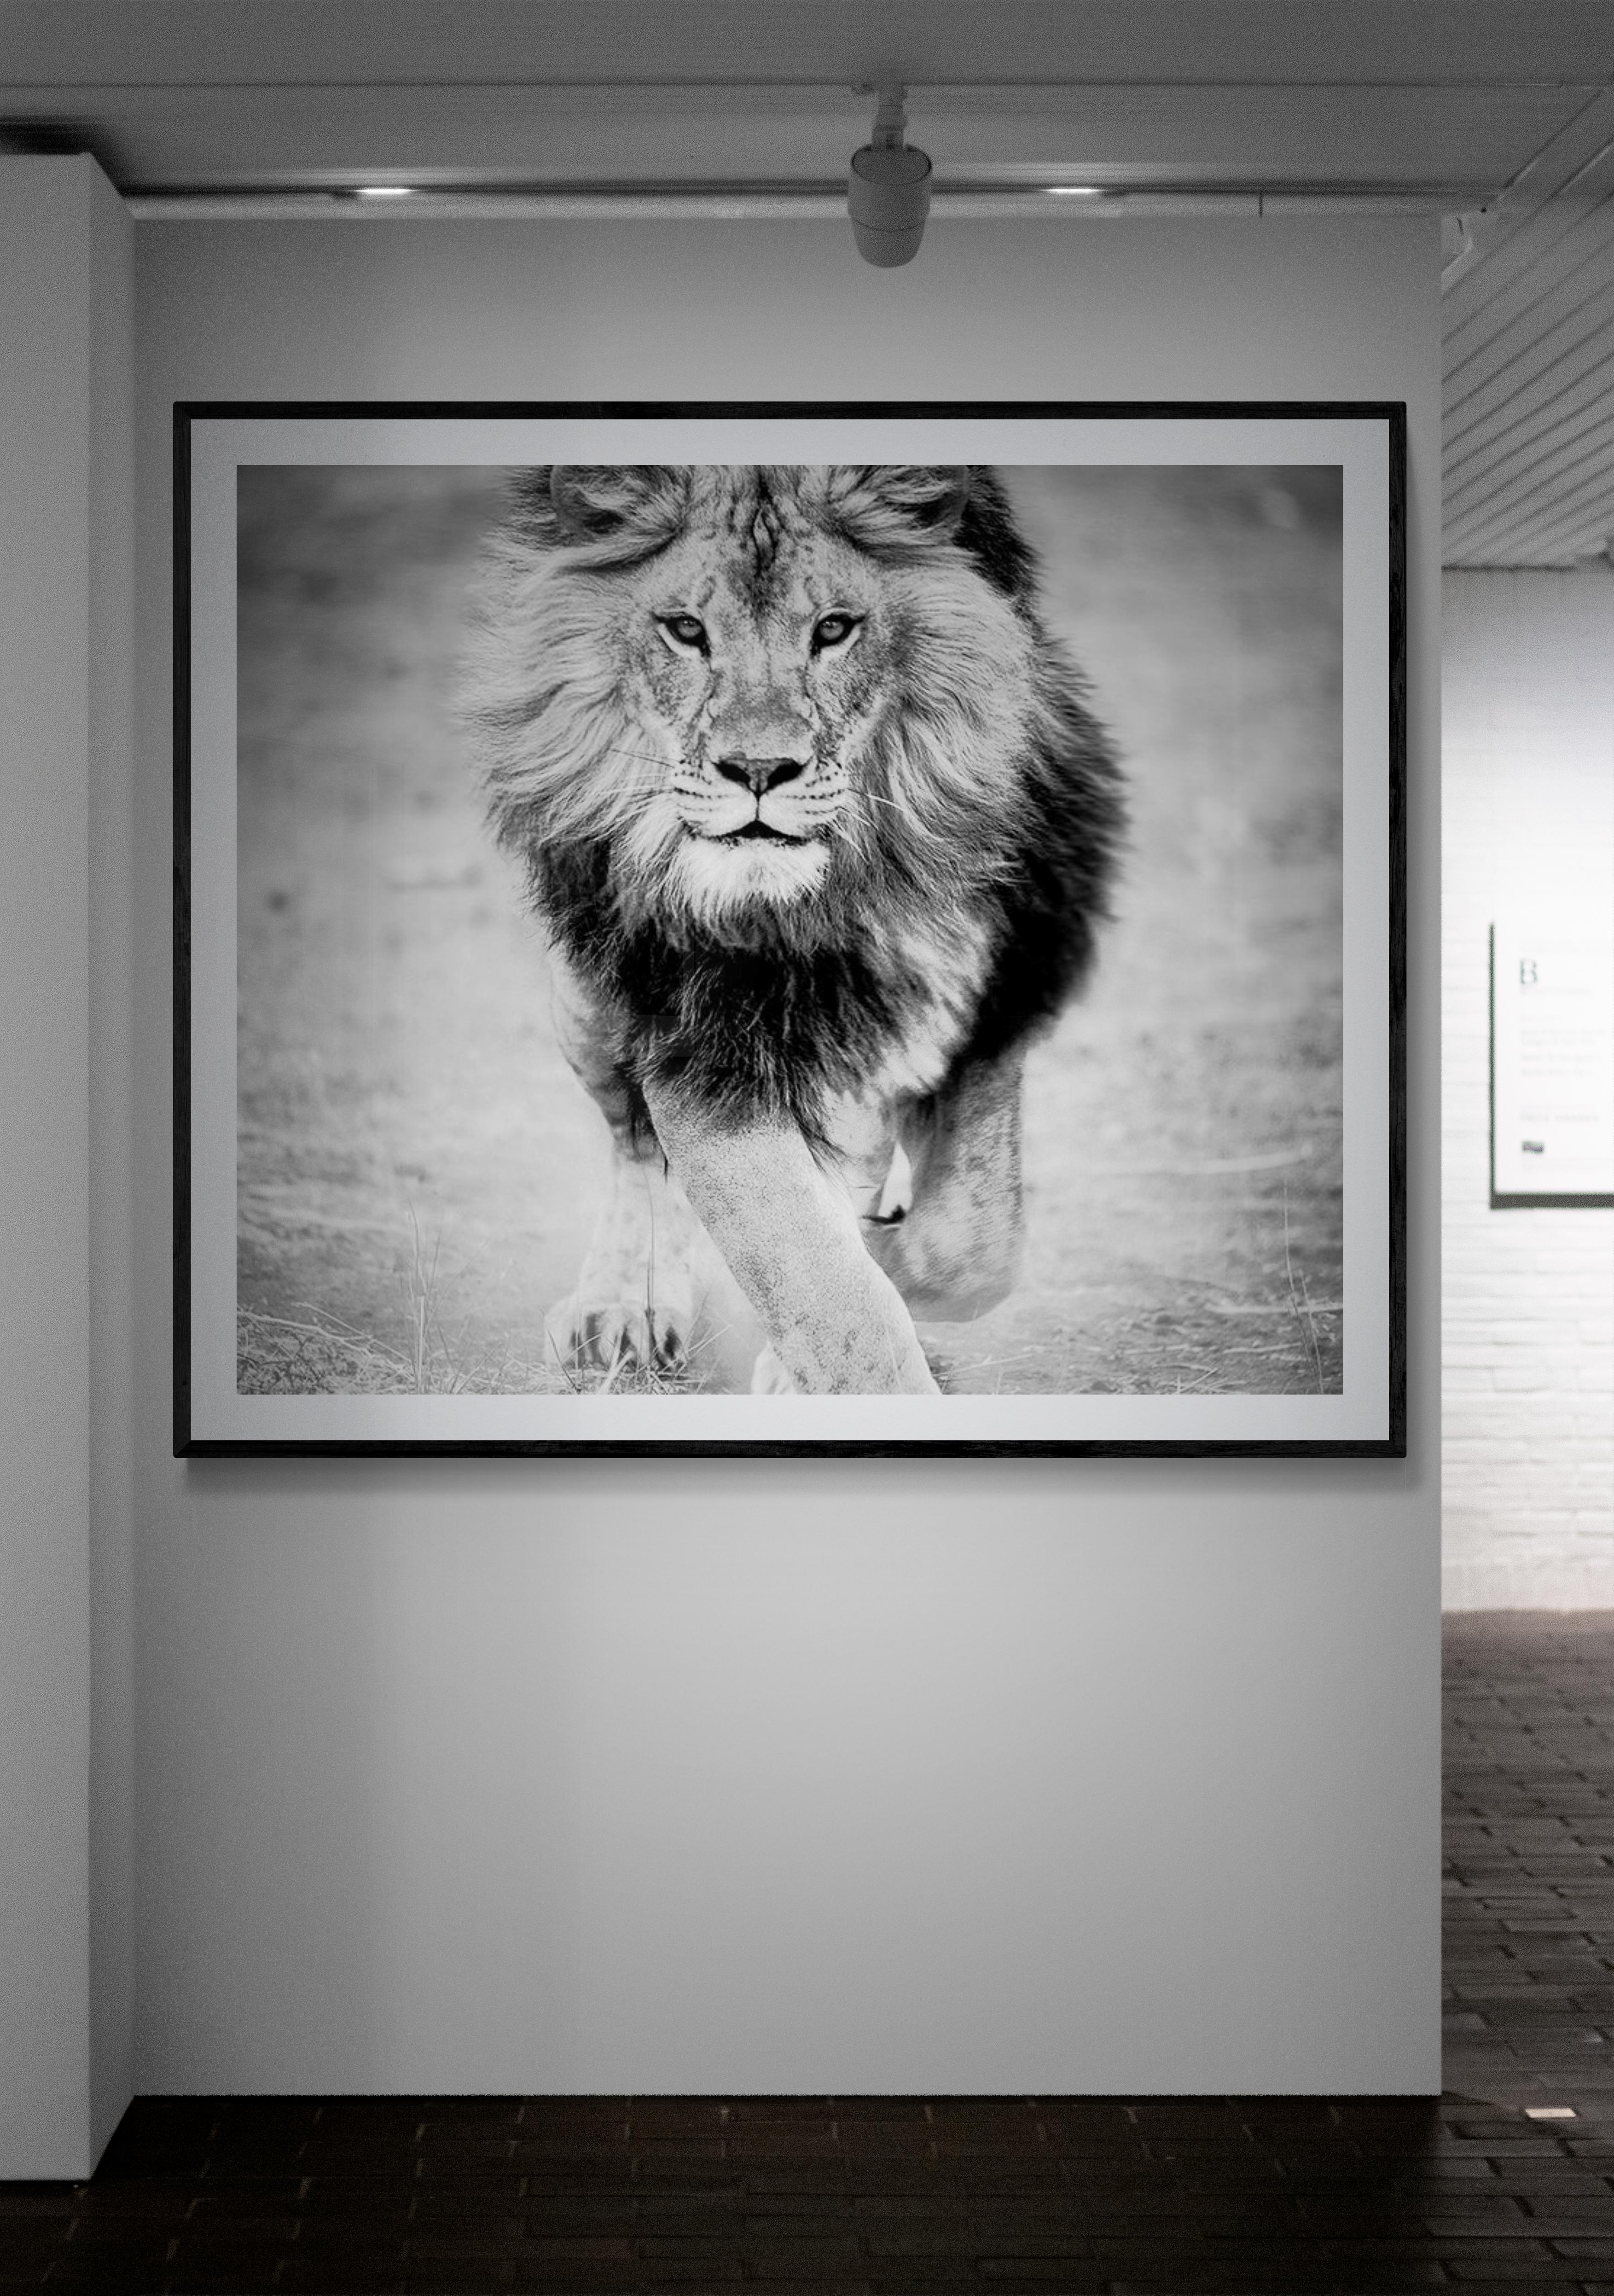 This is a contemporary photograph of an African Lion shot by Shane Russeck
36x48  edition of 12
Signed and numbered 
This is the last of the edition
Printed on archival luster paper.  

Shane Russeck has built a reputation for capturing America's